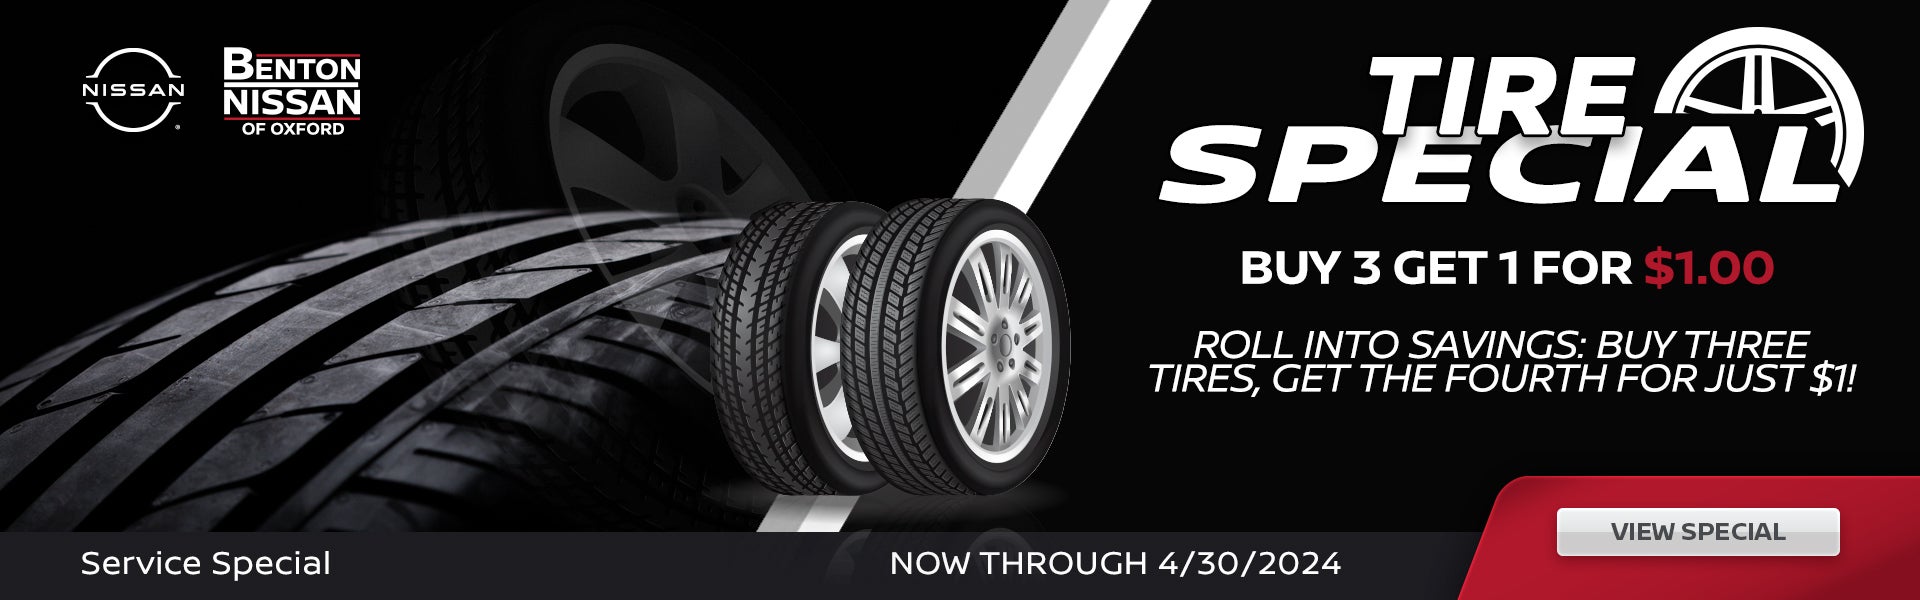 Tire Special!